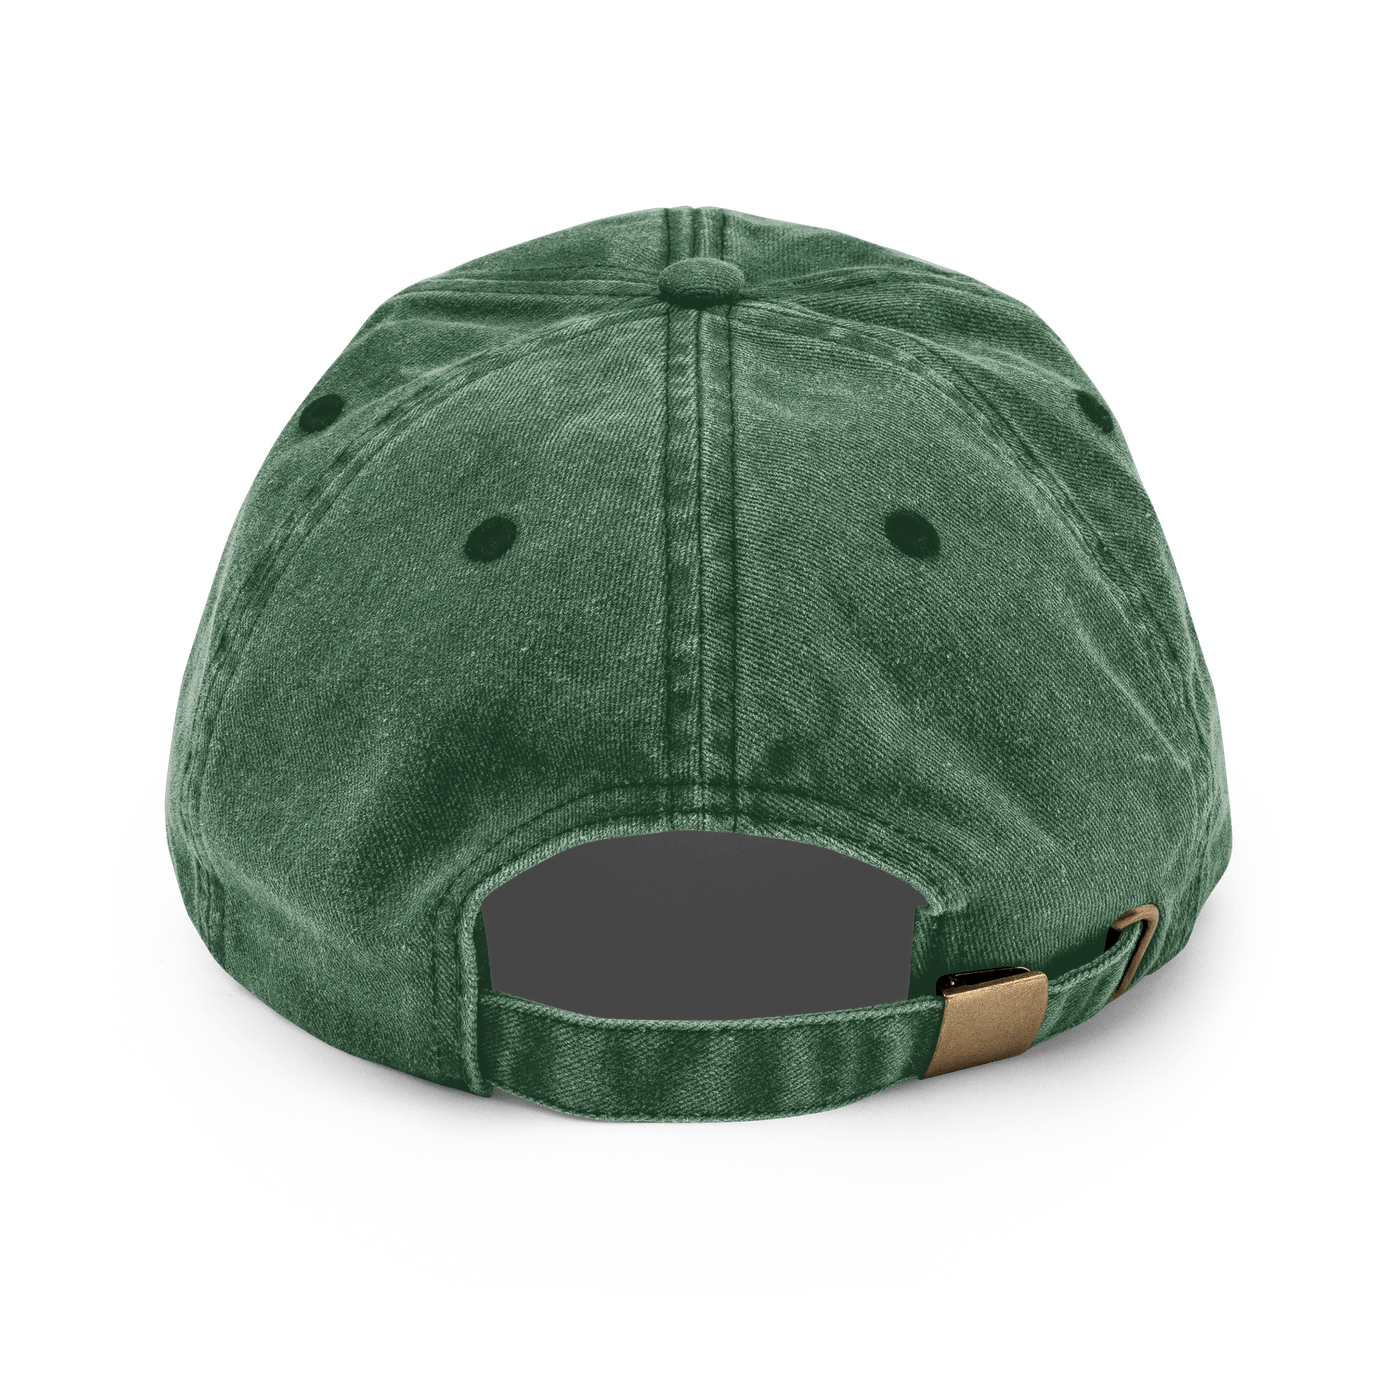 Lonely Duck Vintage Hat - Vintage Bottle Green - - Just Another Cap Store